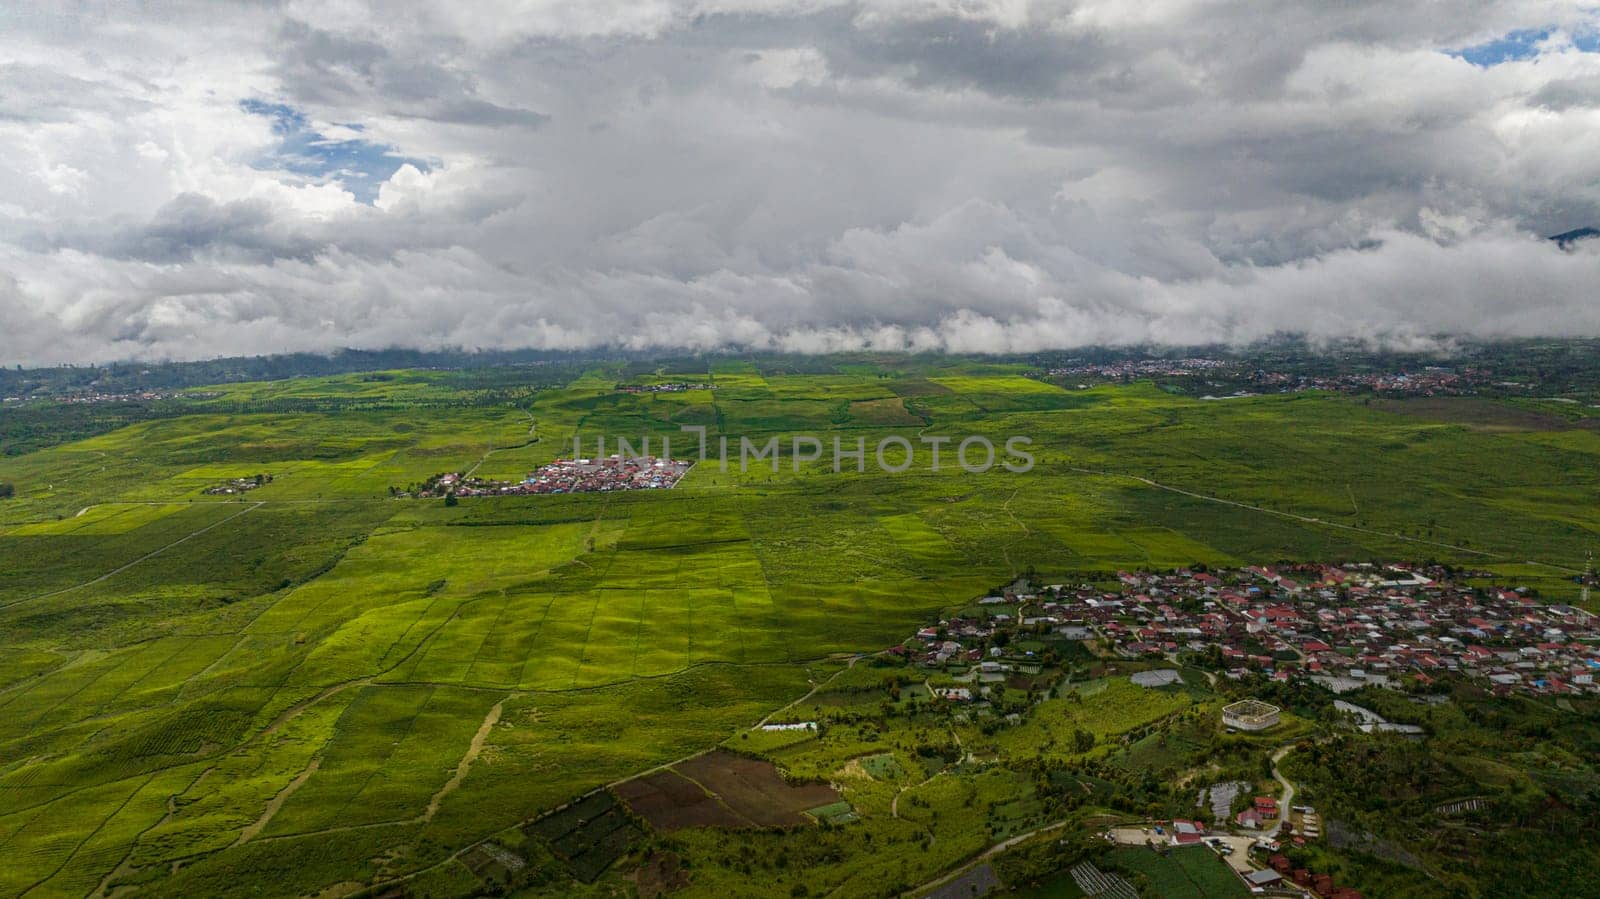 Top view of valley with tea plantations and farmland in the highlands. Kayu Aro, Sumatra, Indonesia.